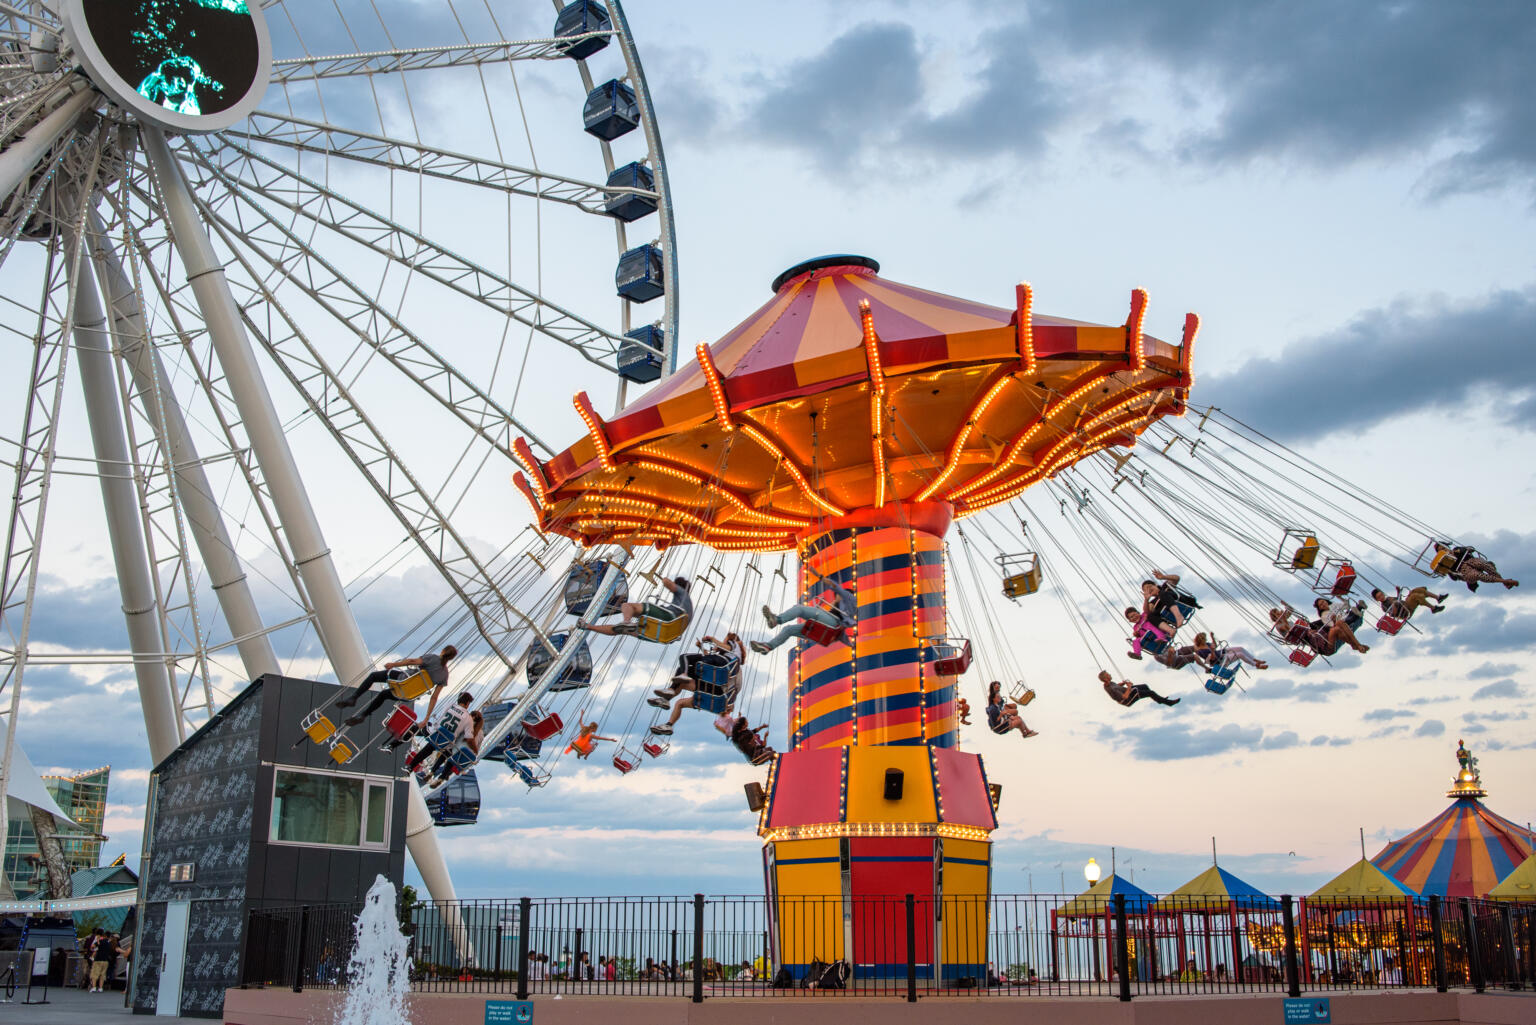 Official Guide to Navy Pier Events, Tours, Attractions in Chicago